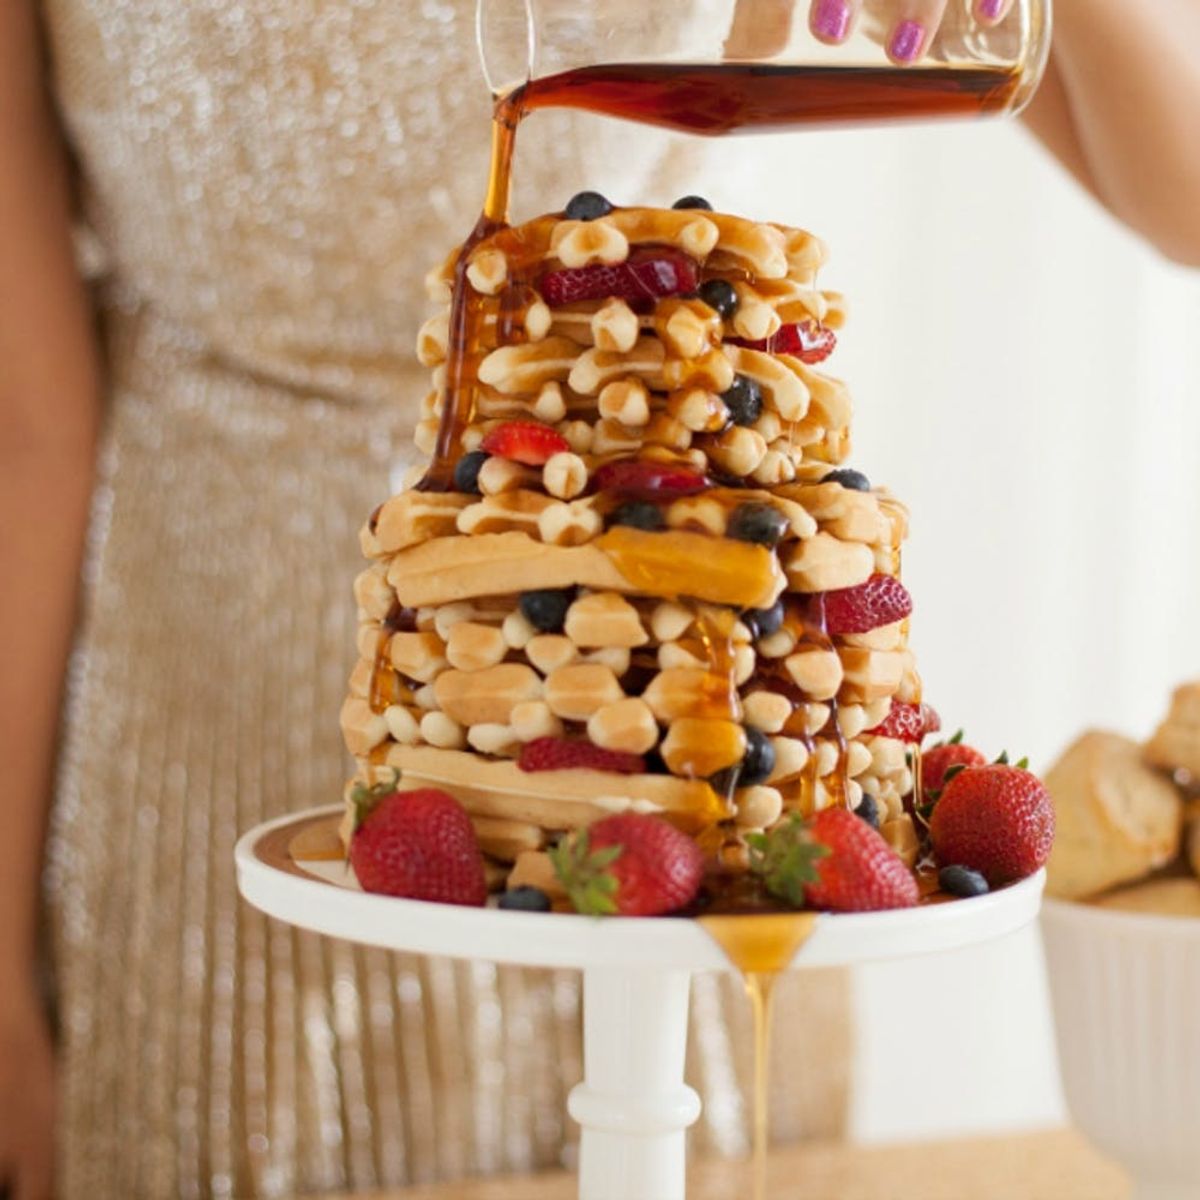 17 Wild Waffle Wedding Cakes That Make Us Want Waffle Cakes for *Every Occasion*